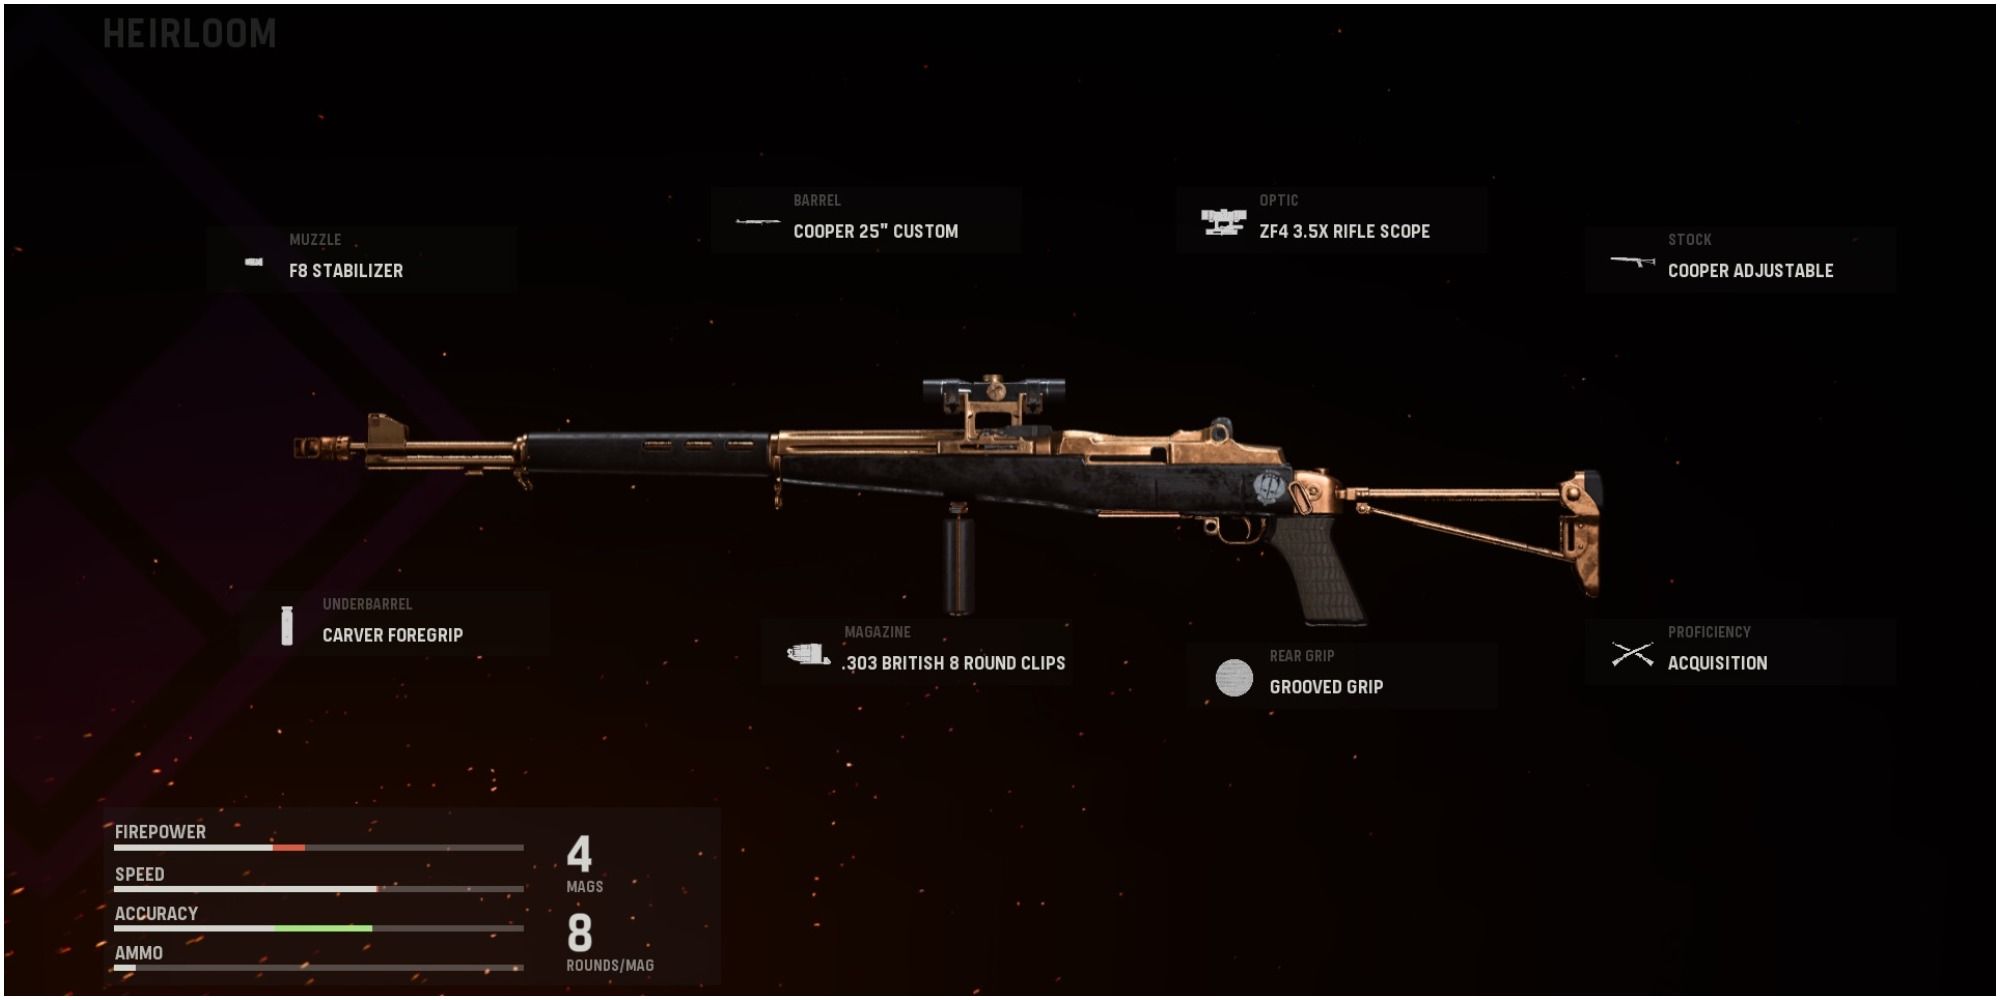 Call Of Duty Vanguard Viewing The Weapon Details On The Heirloom